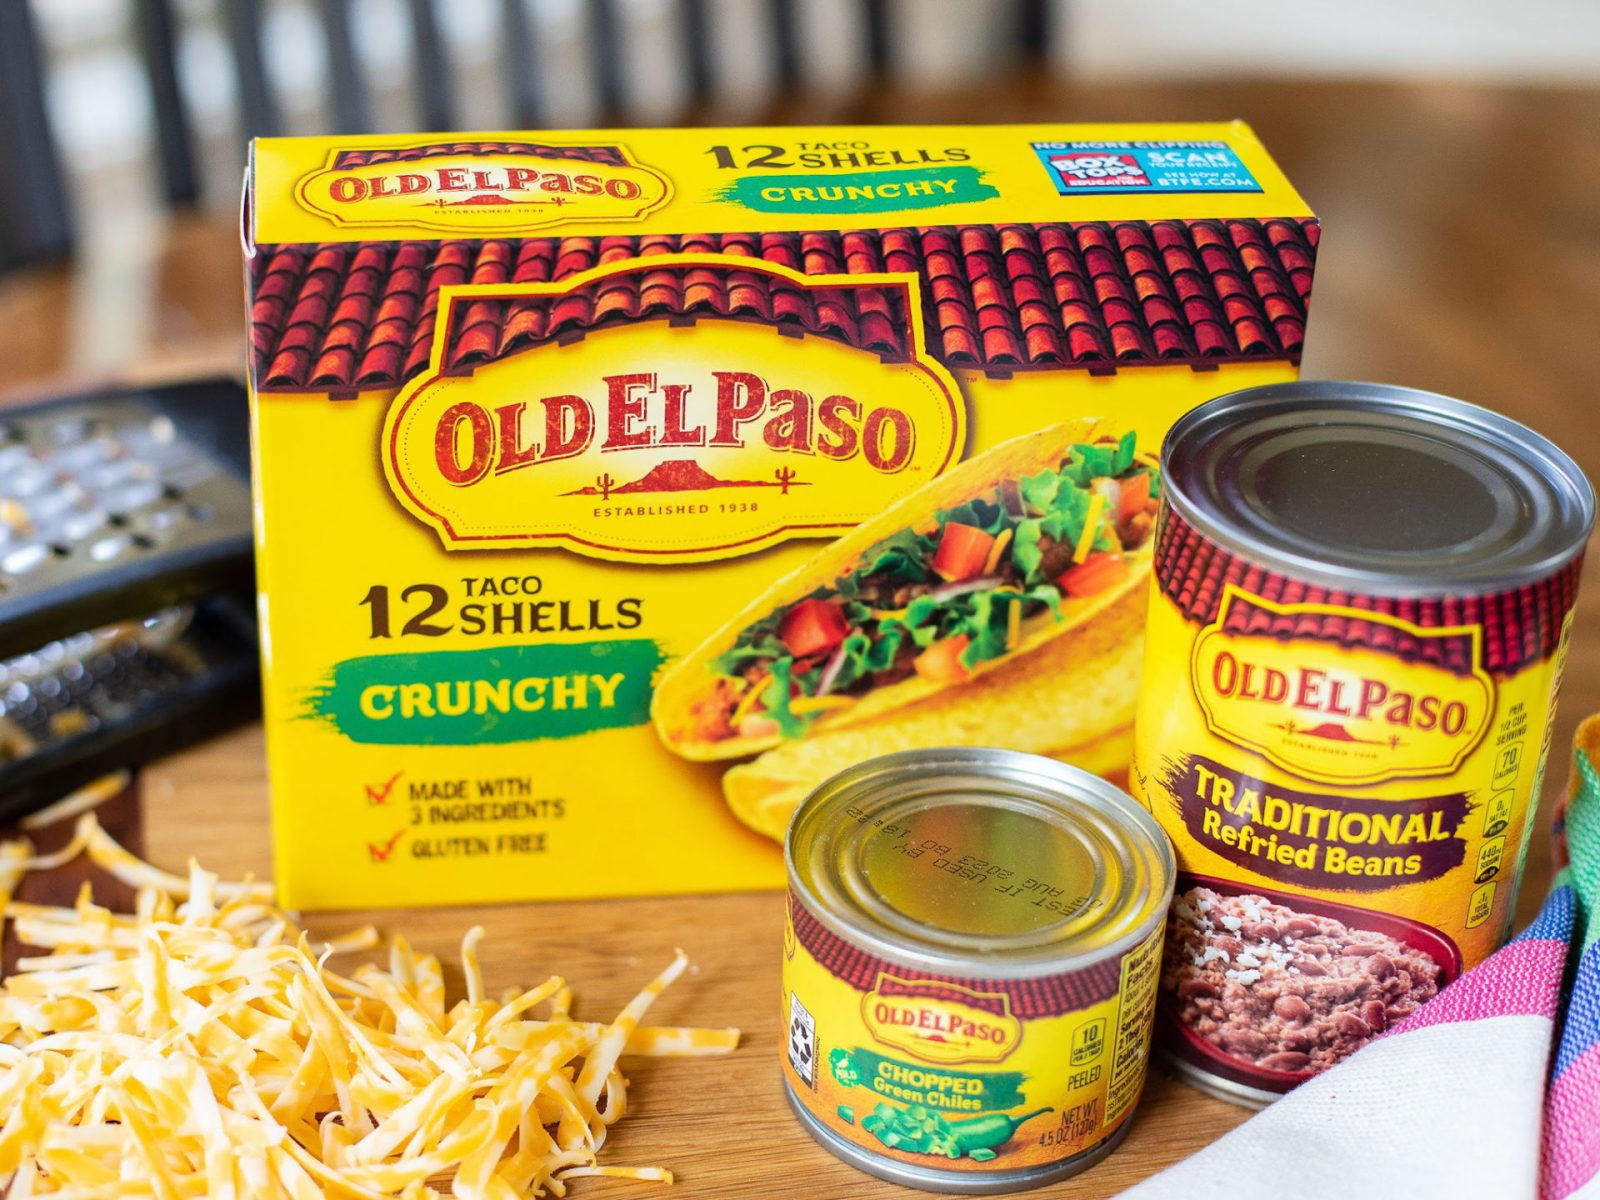 Taco Tuesday On The Cheap With Great Deal On Old El Paso Products At Publix